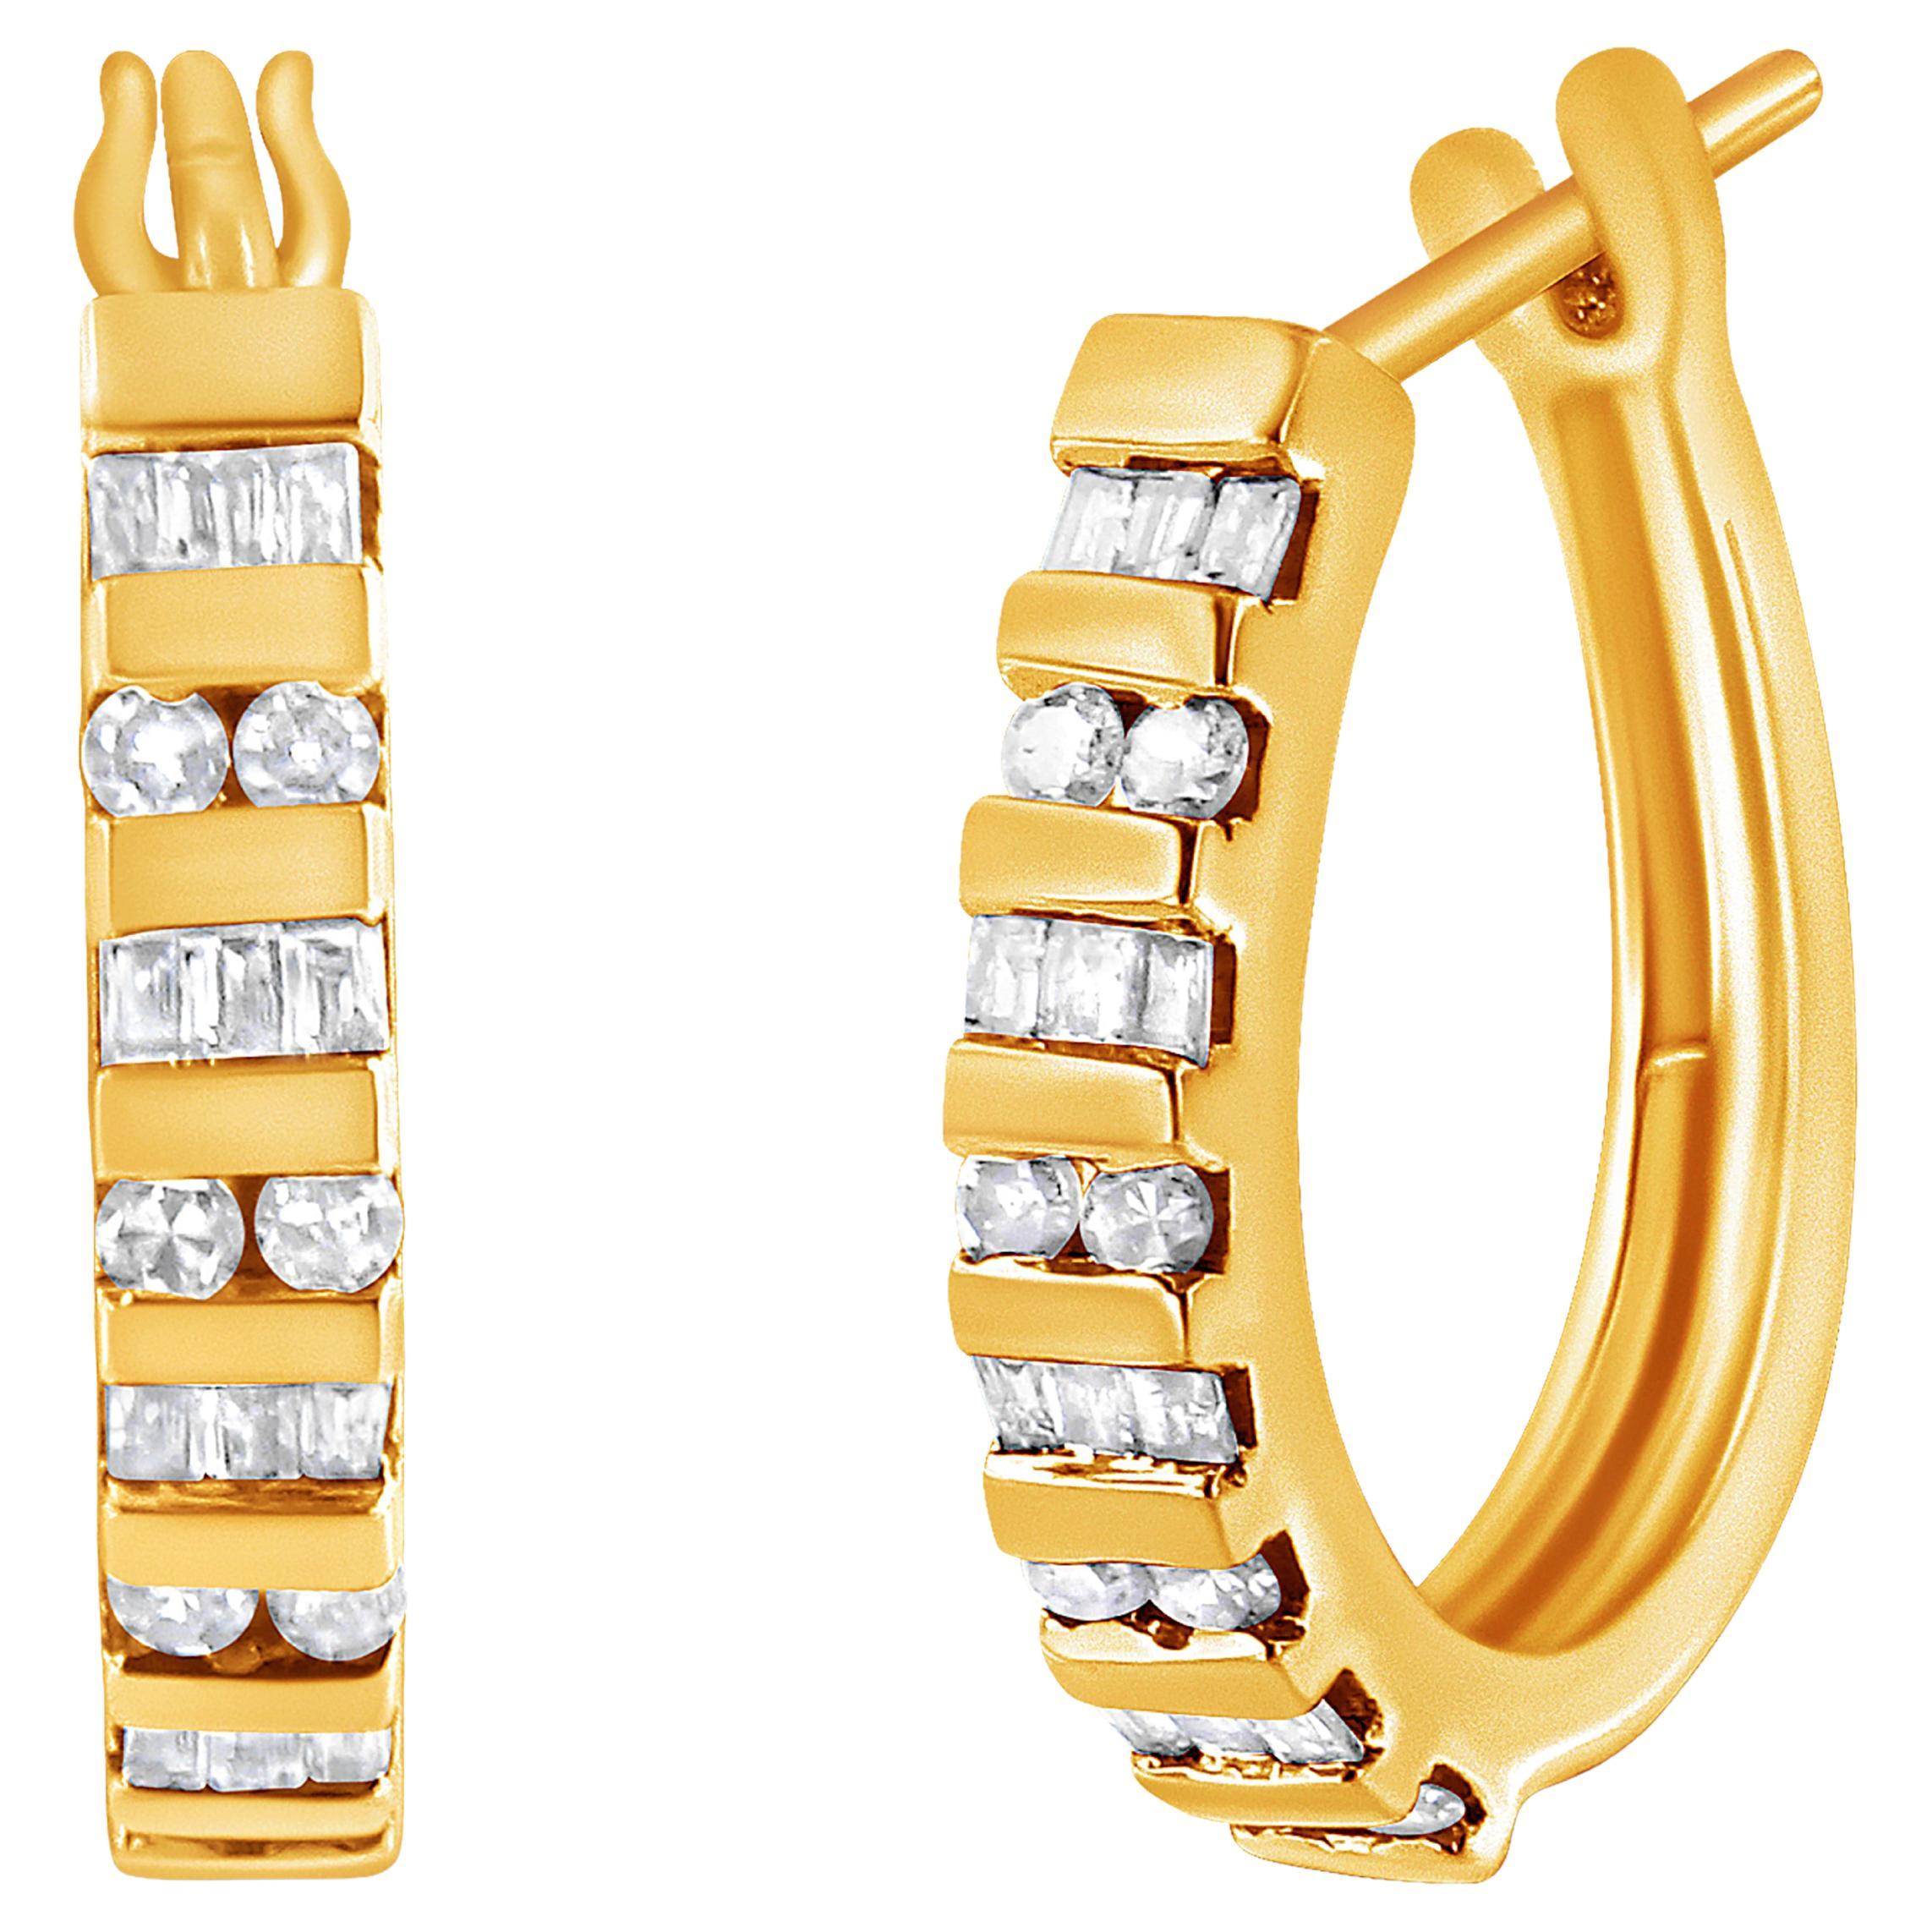 10K Yellow Gold 1/2 Carat Round and Baguette-Cut Diamond Hoop Earrings For Sale